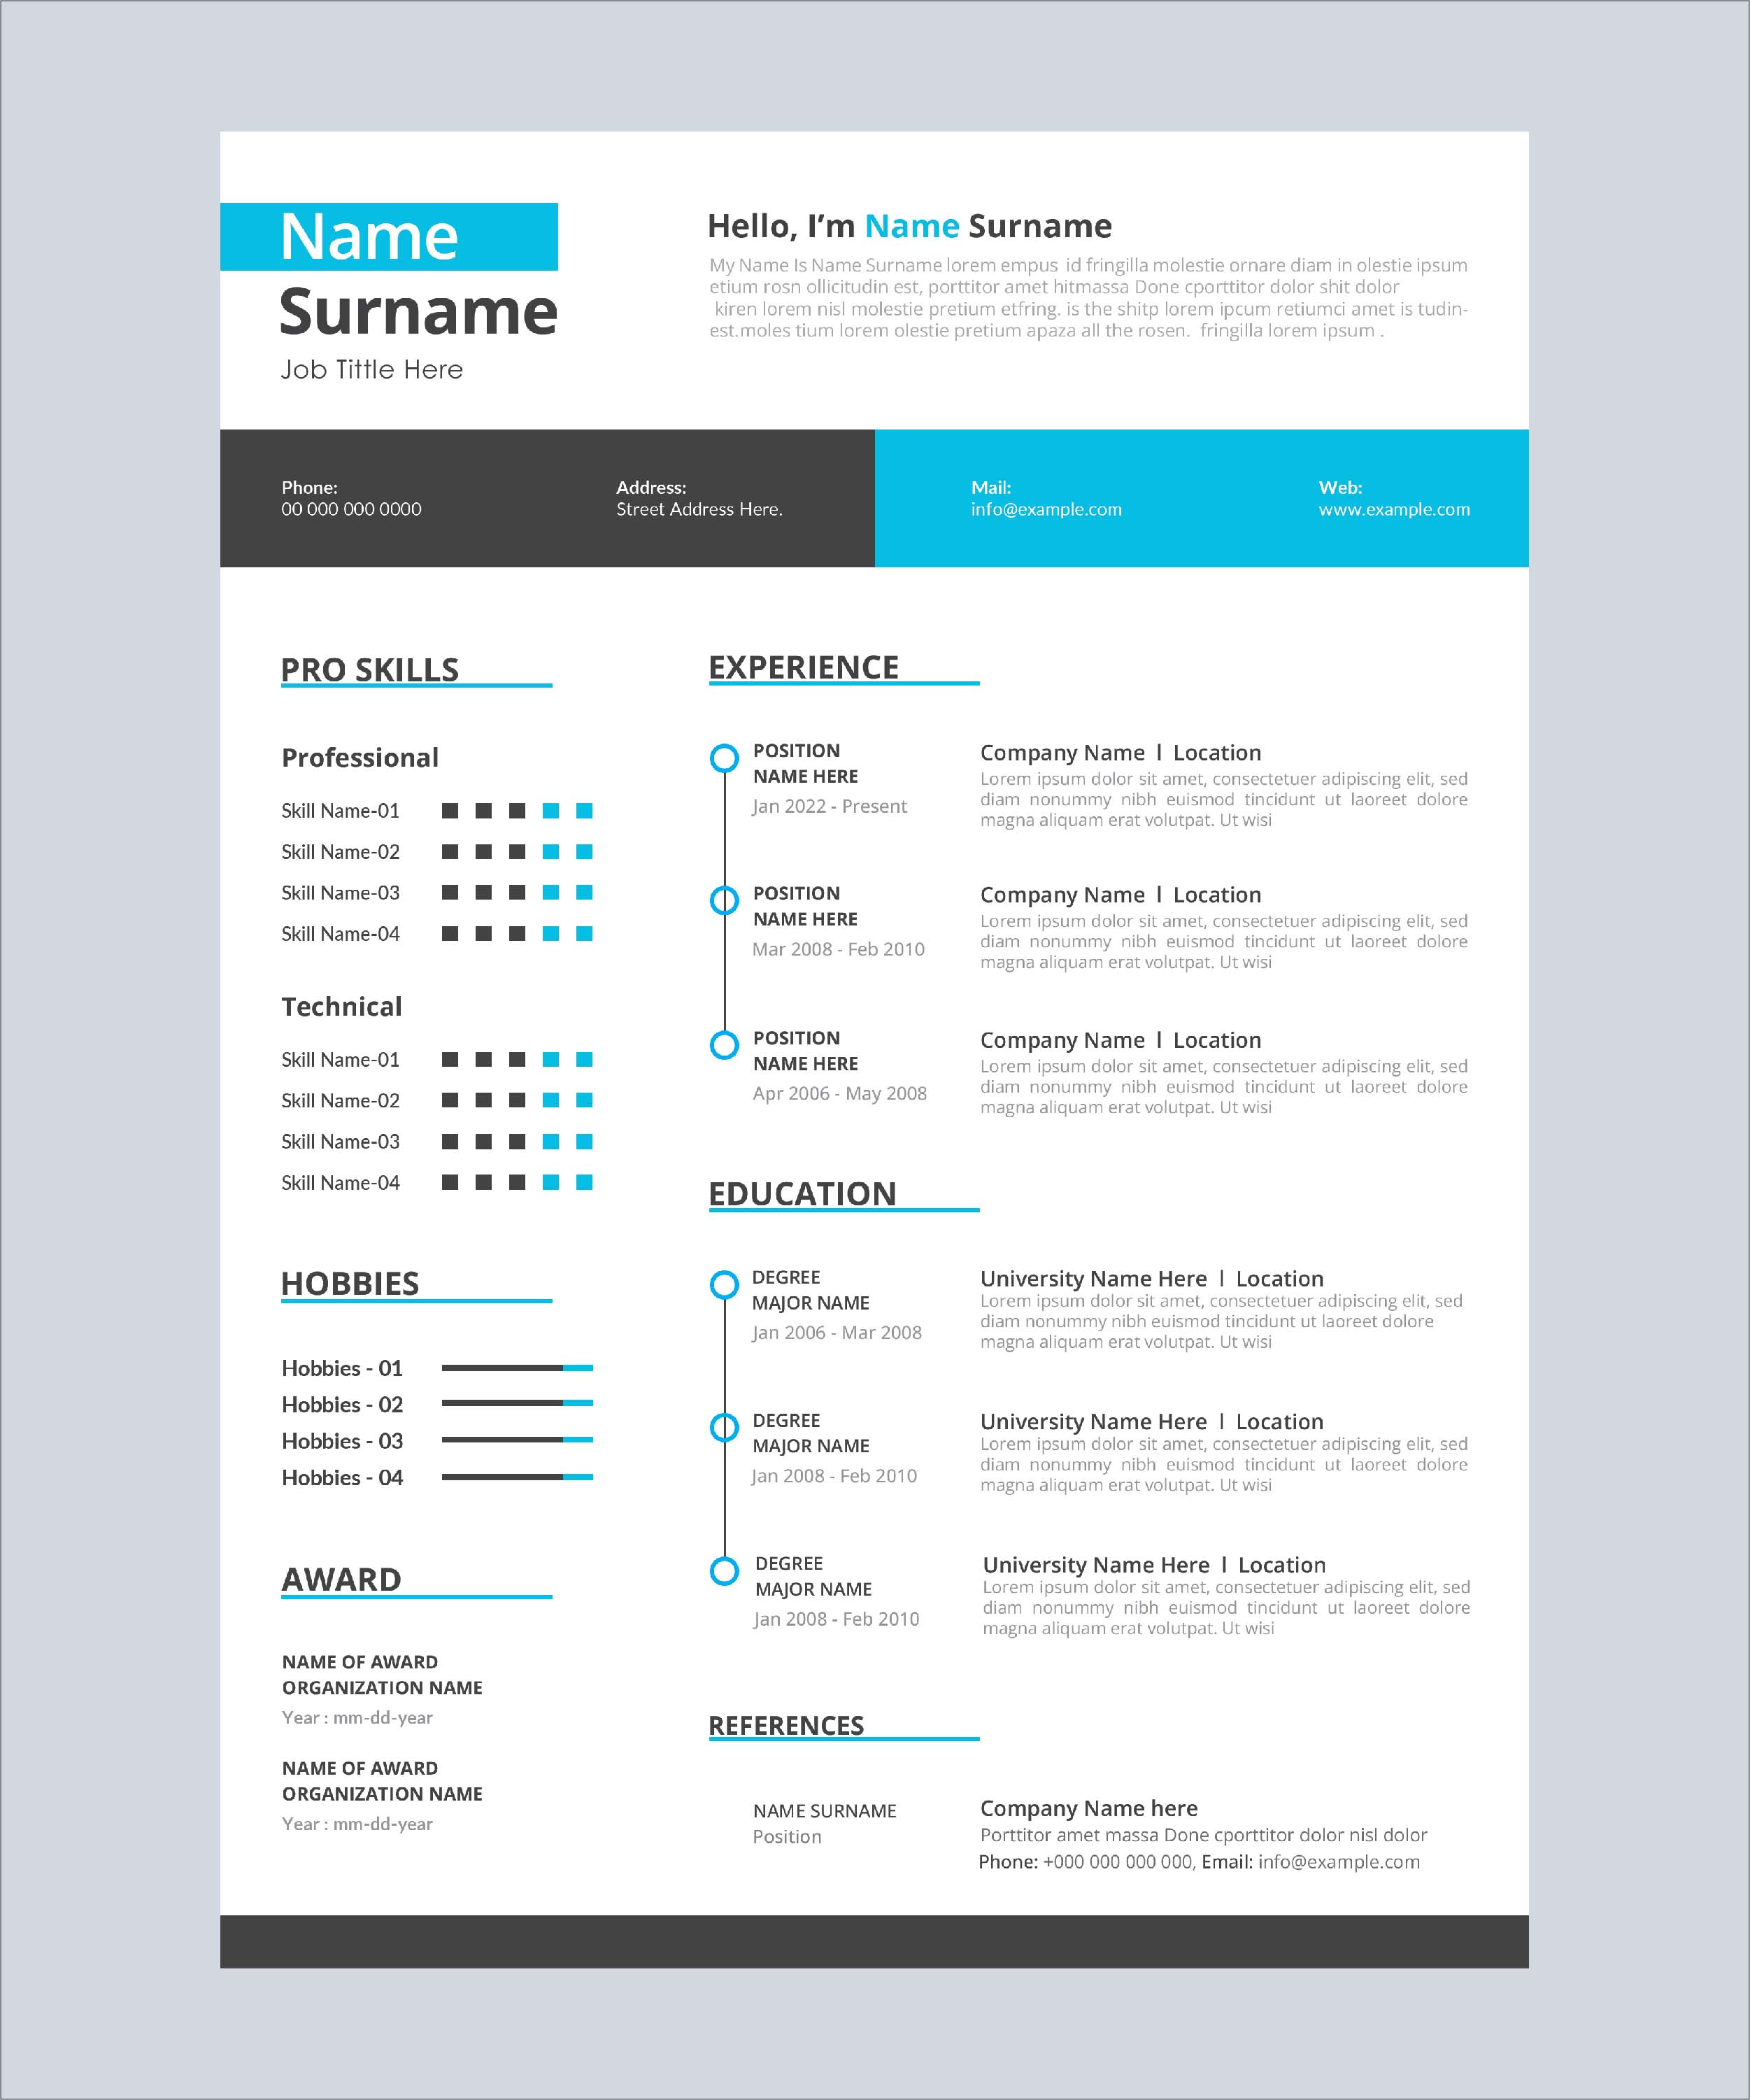 Clean and professional resume with blue accents.